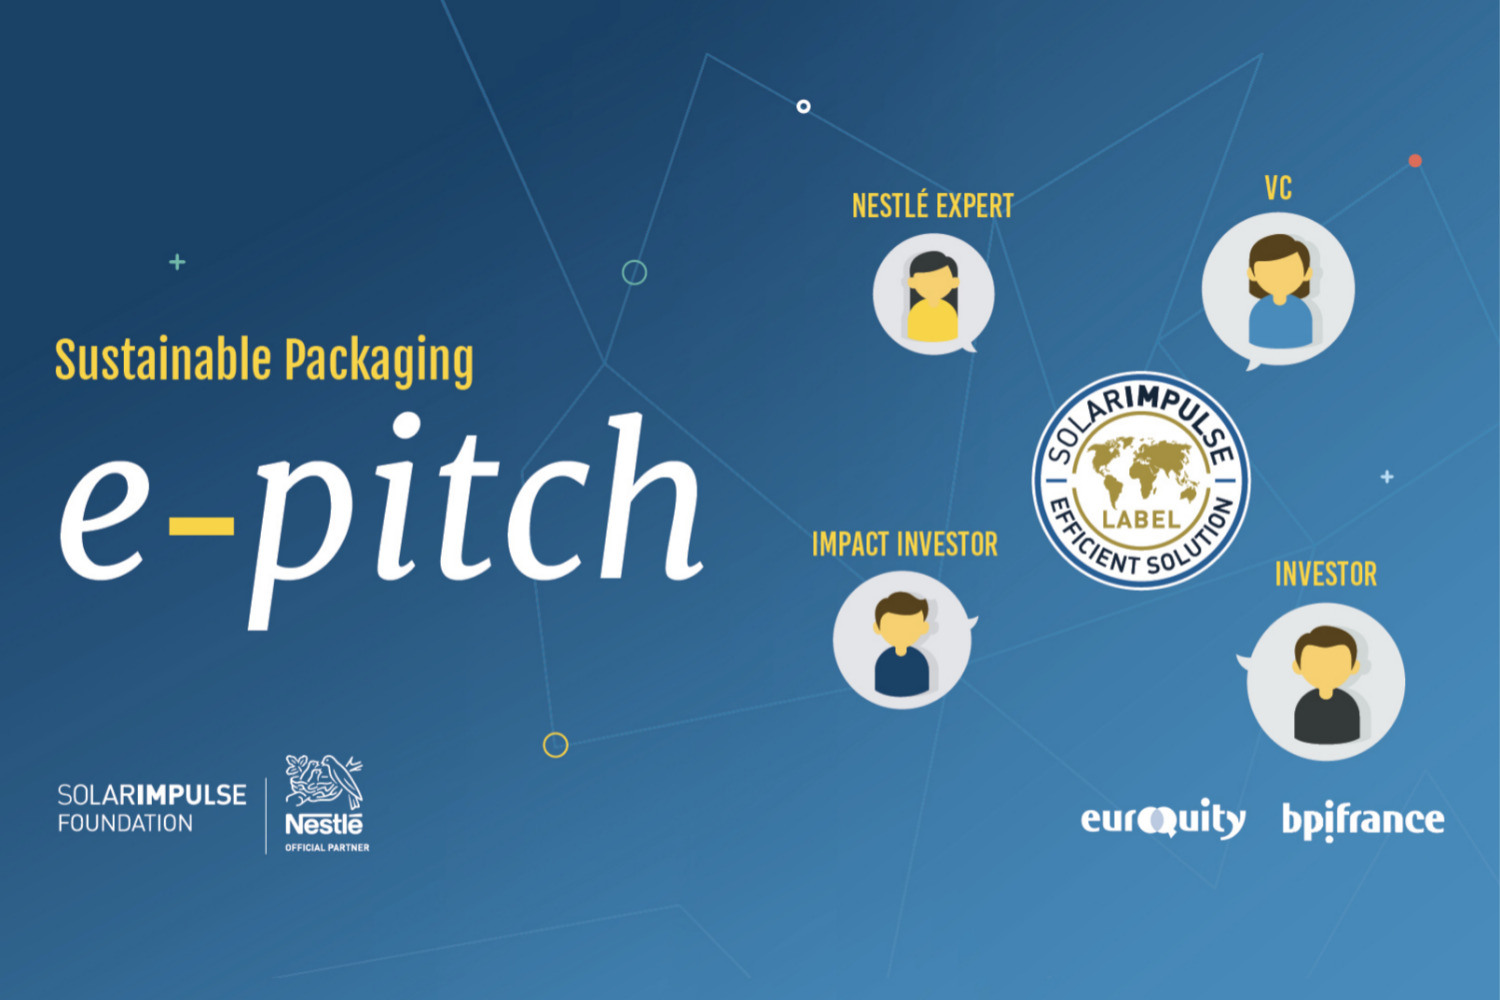 E-Pitch Solar Impulse Investment - "Packaging and New Materials" - SIF x Nestlé